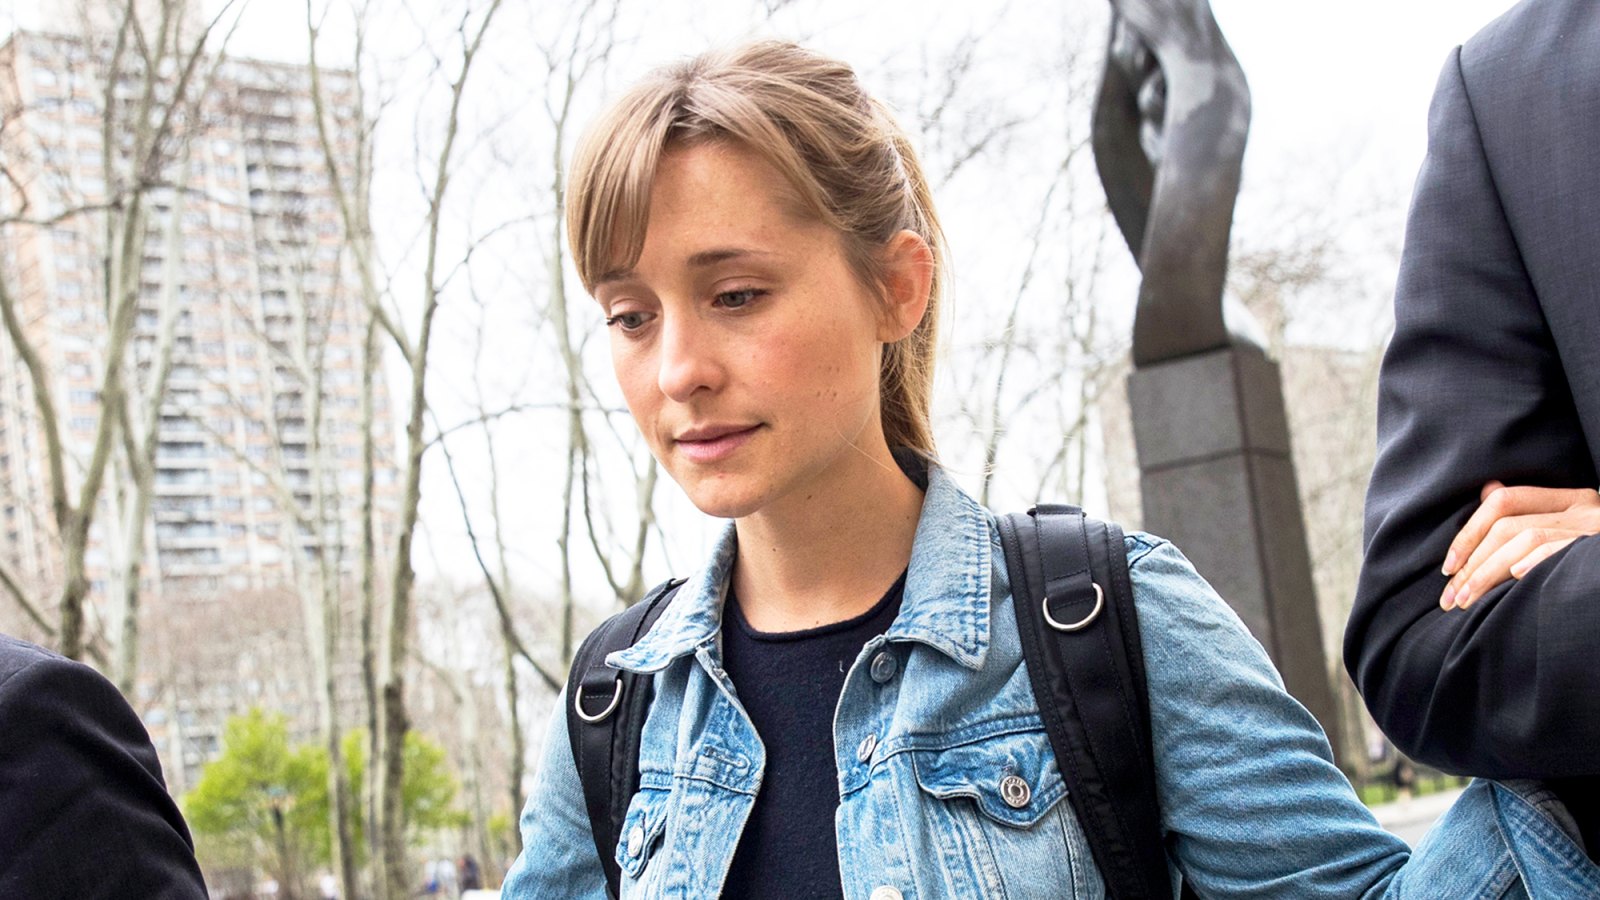 Allison Mack leaves U.S. District Court for the Eastern District of New York on April 24, 2018 in the Brooklyn, New York.